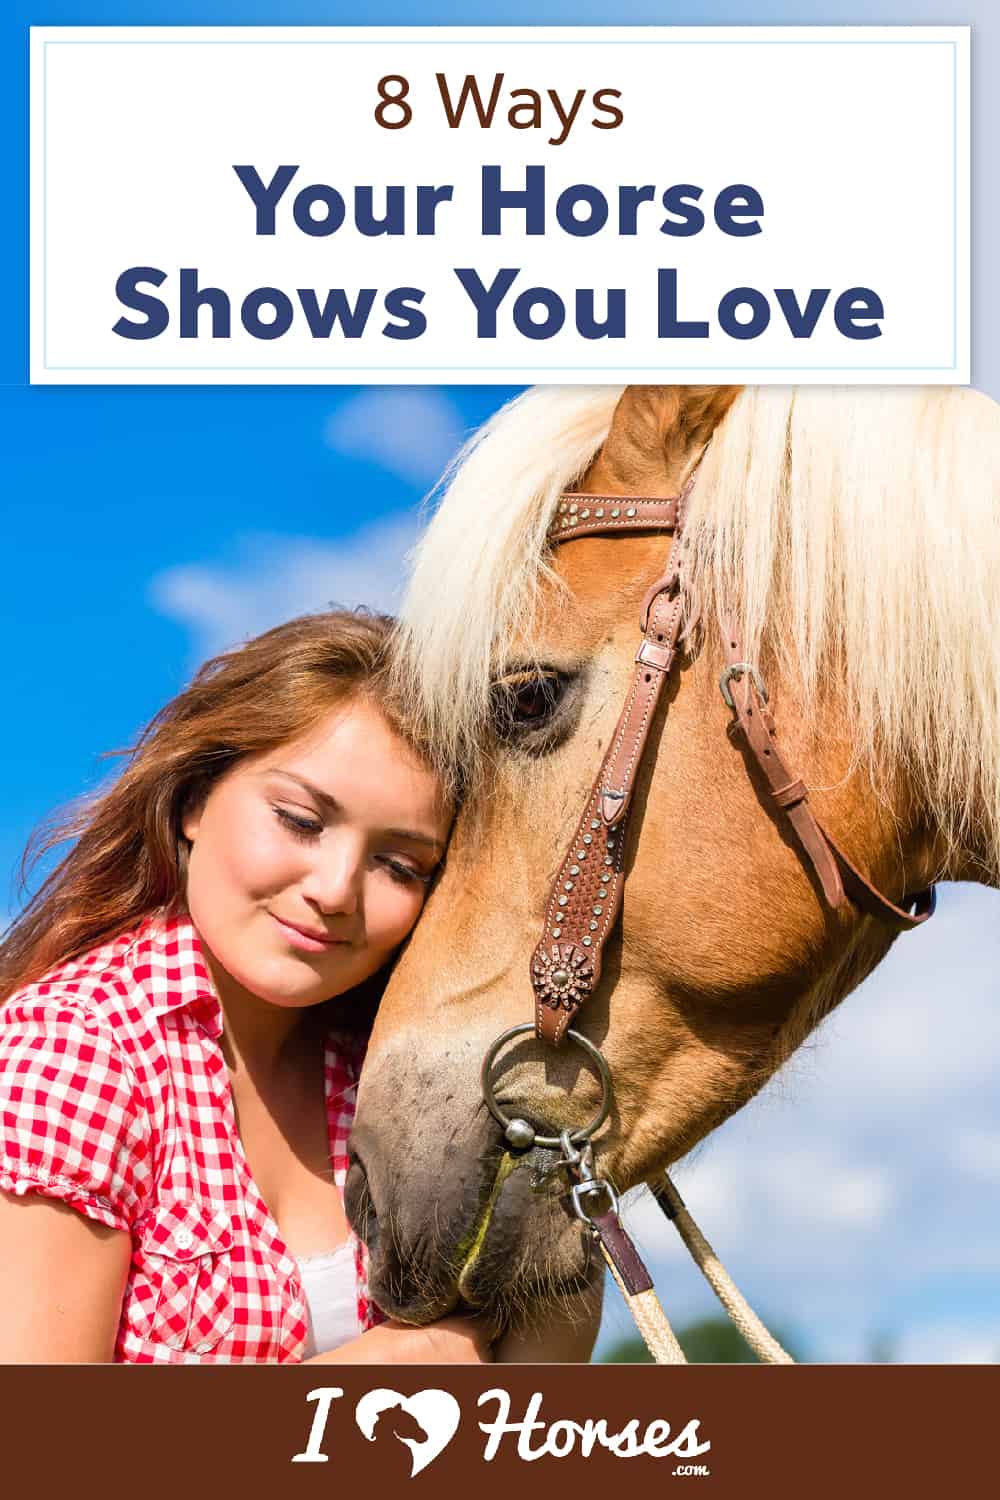 8 Ways Your Horse Shows You Love